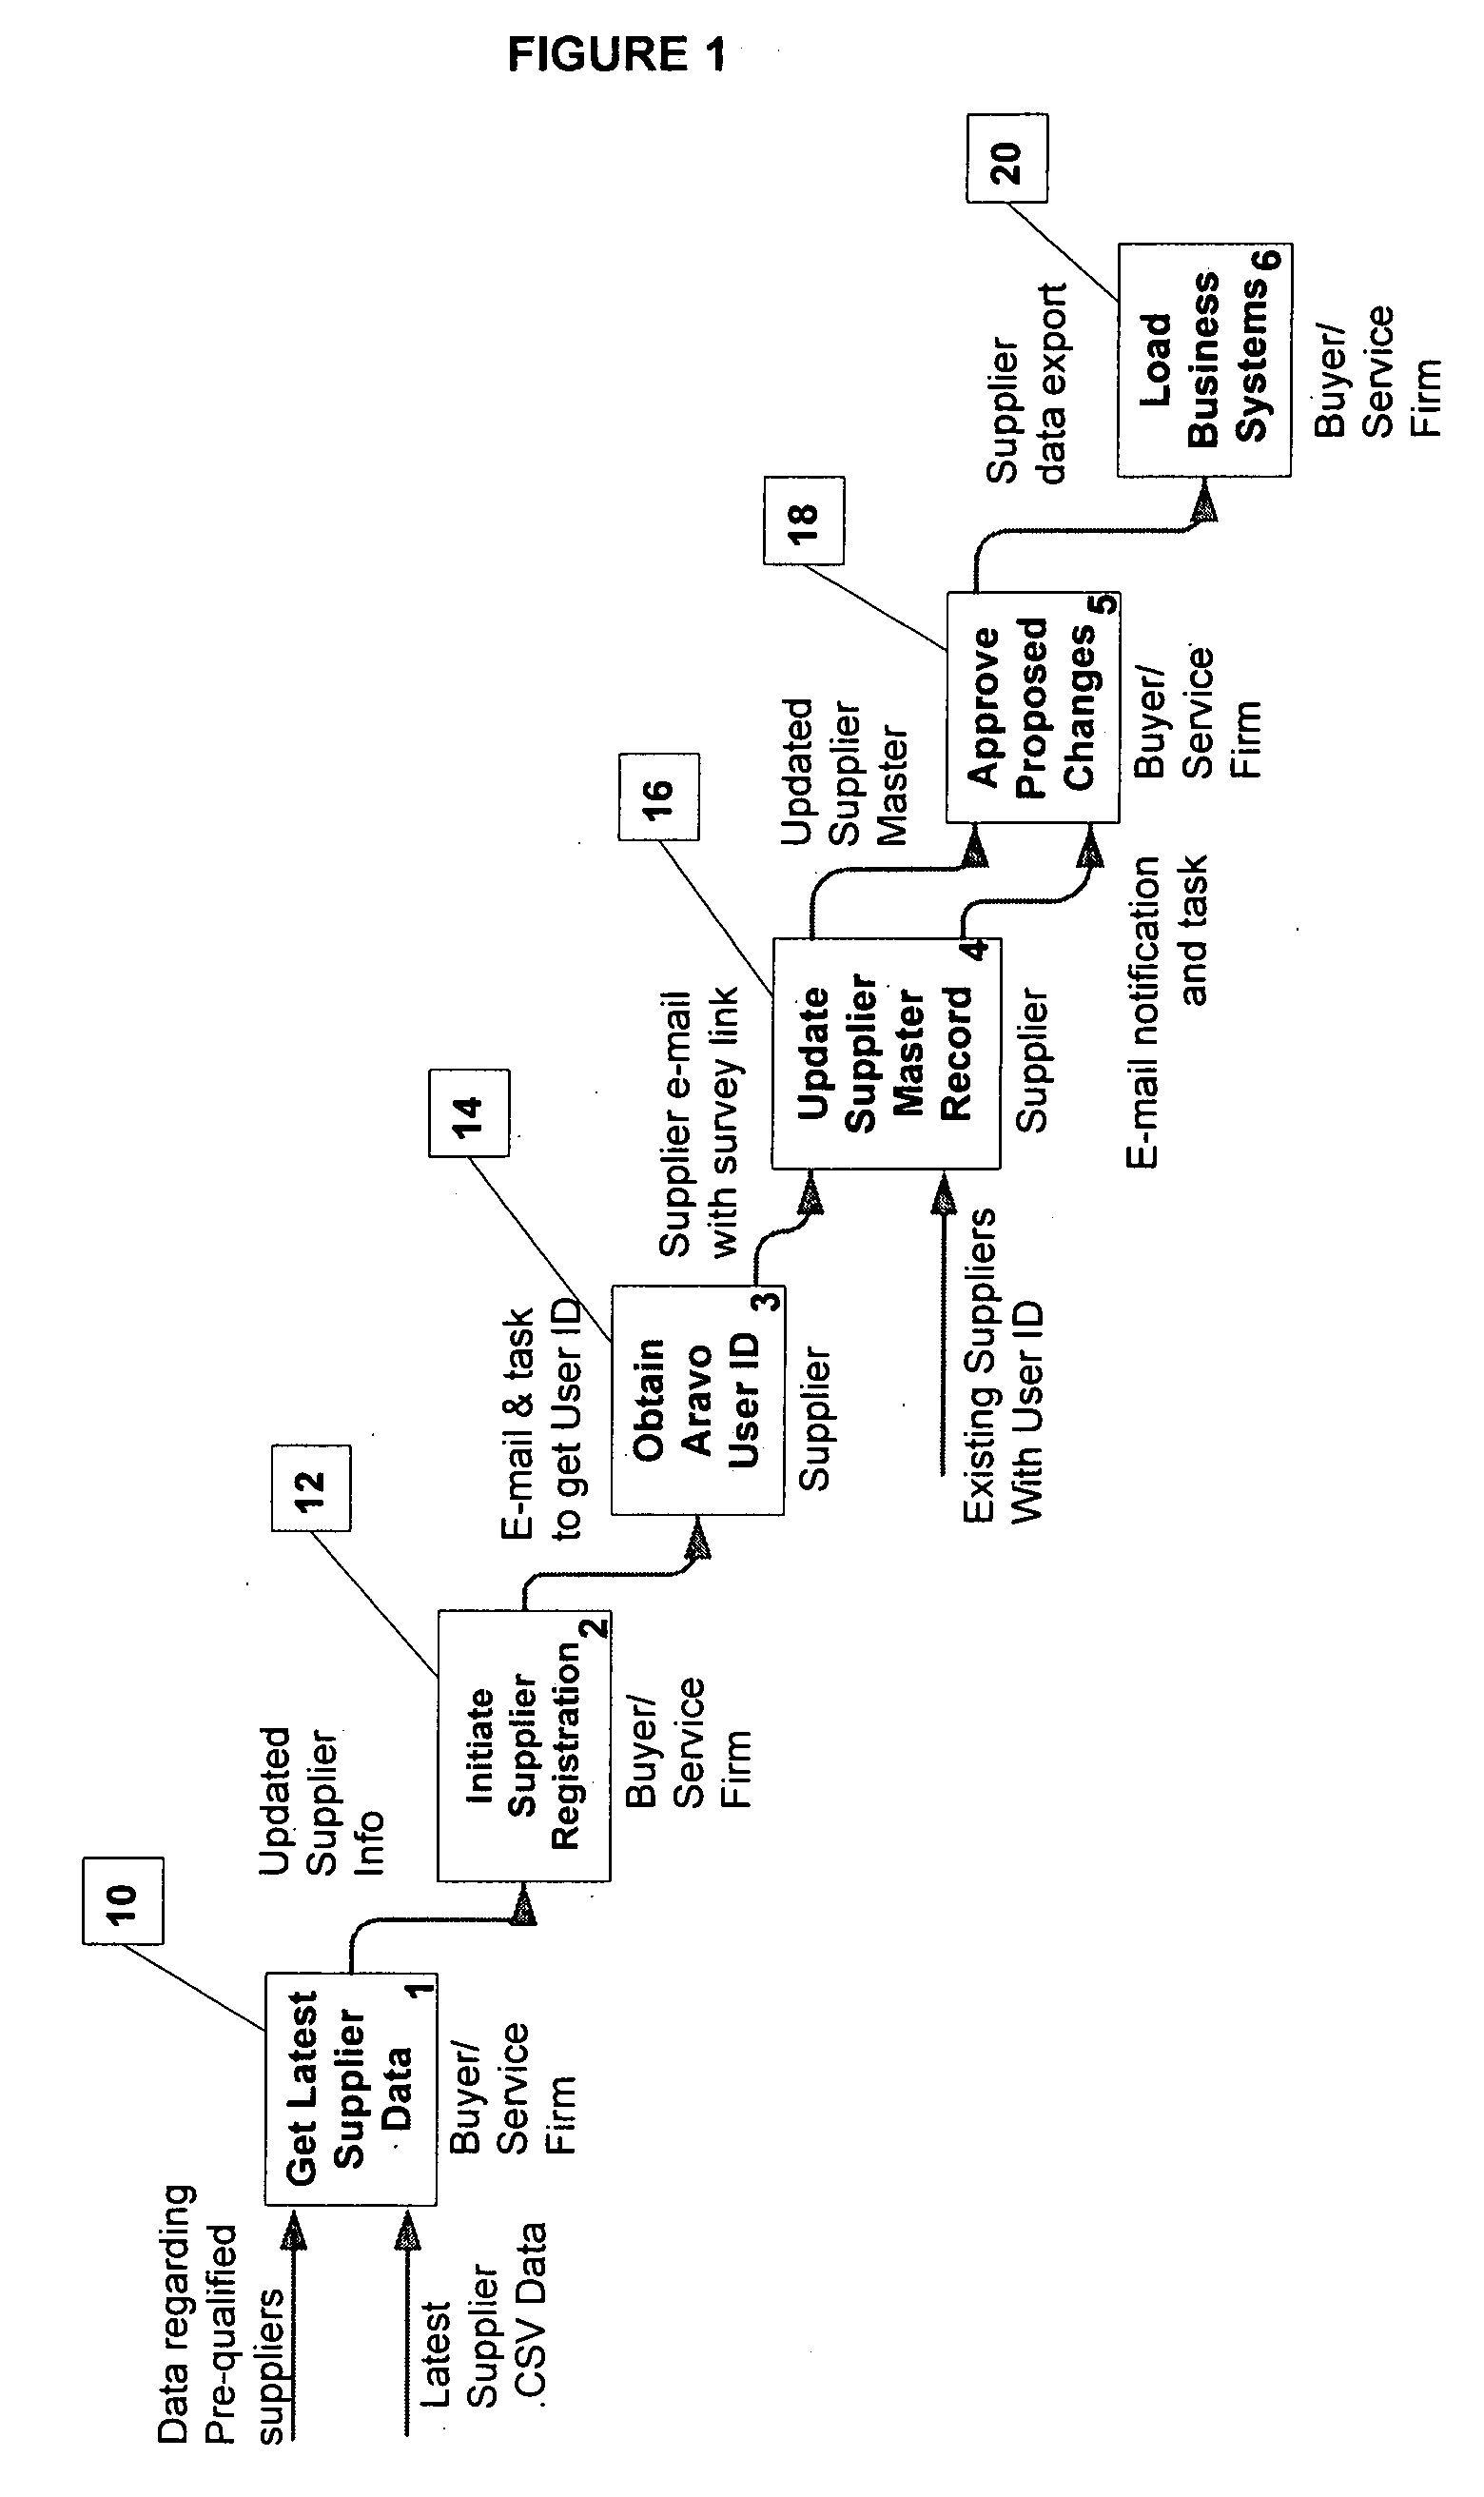 Method and system for computer-implemented procurement from pre-qualified suppliers